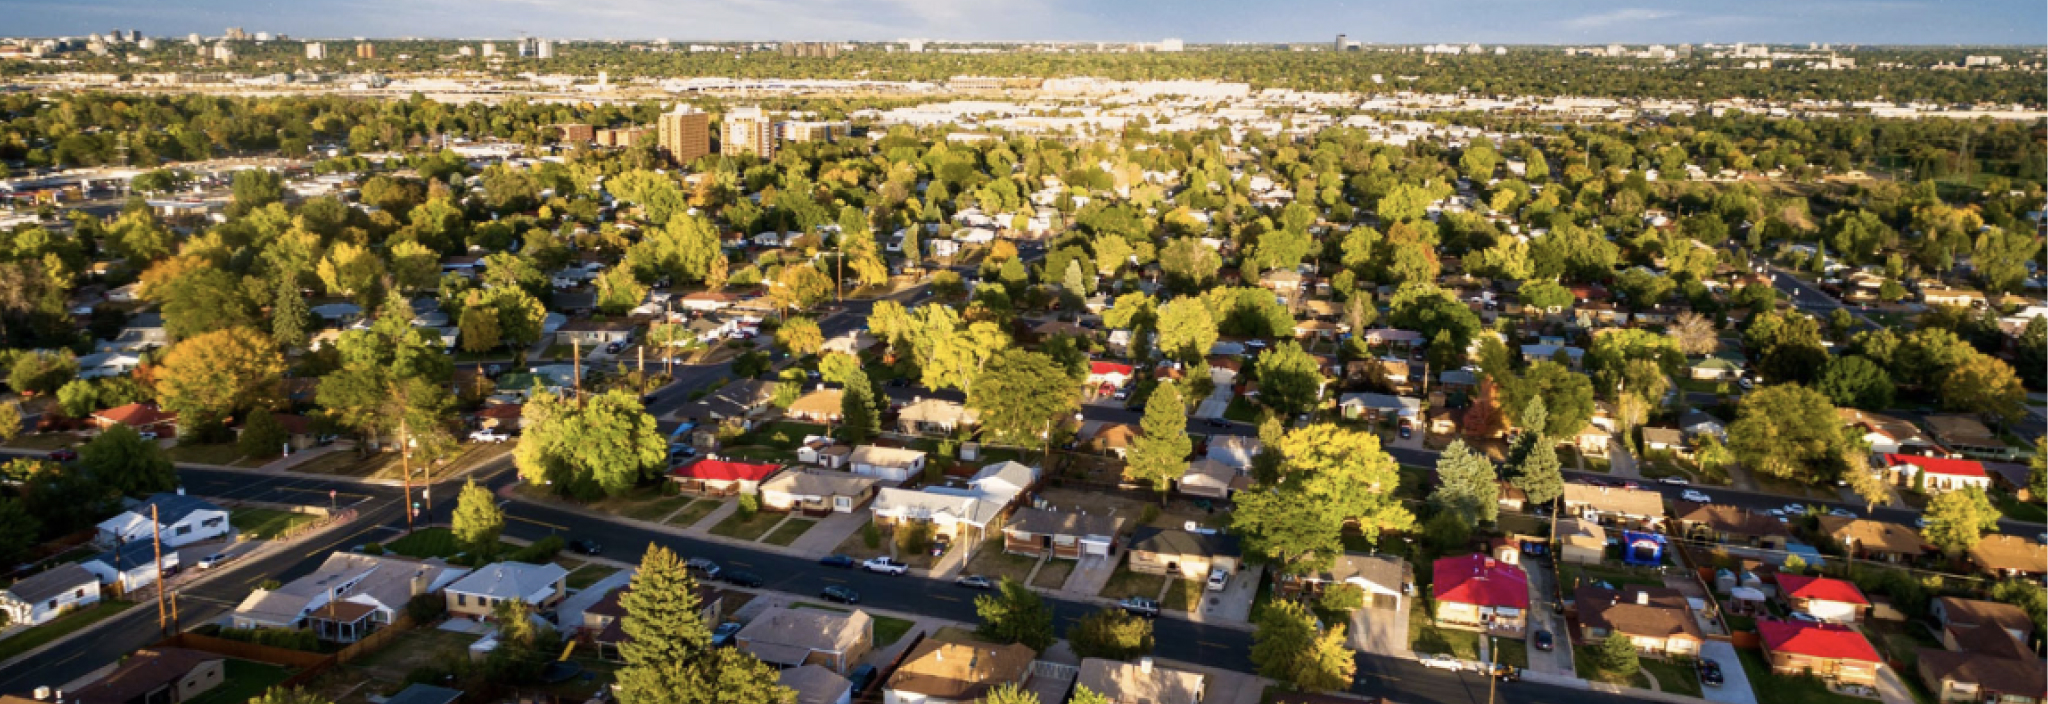 Aerial view of a sprawling neighbourhood with houses, yards and trees